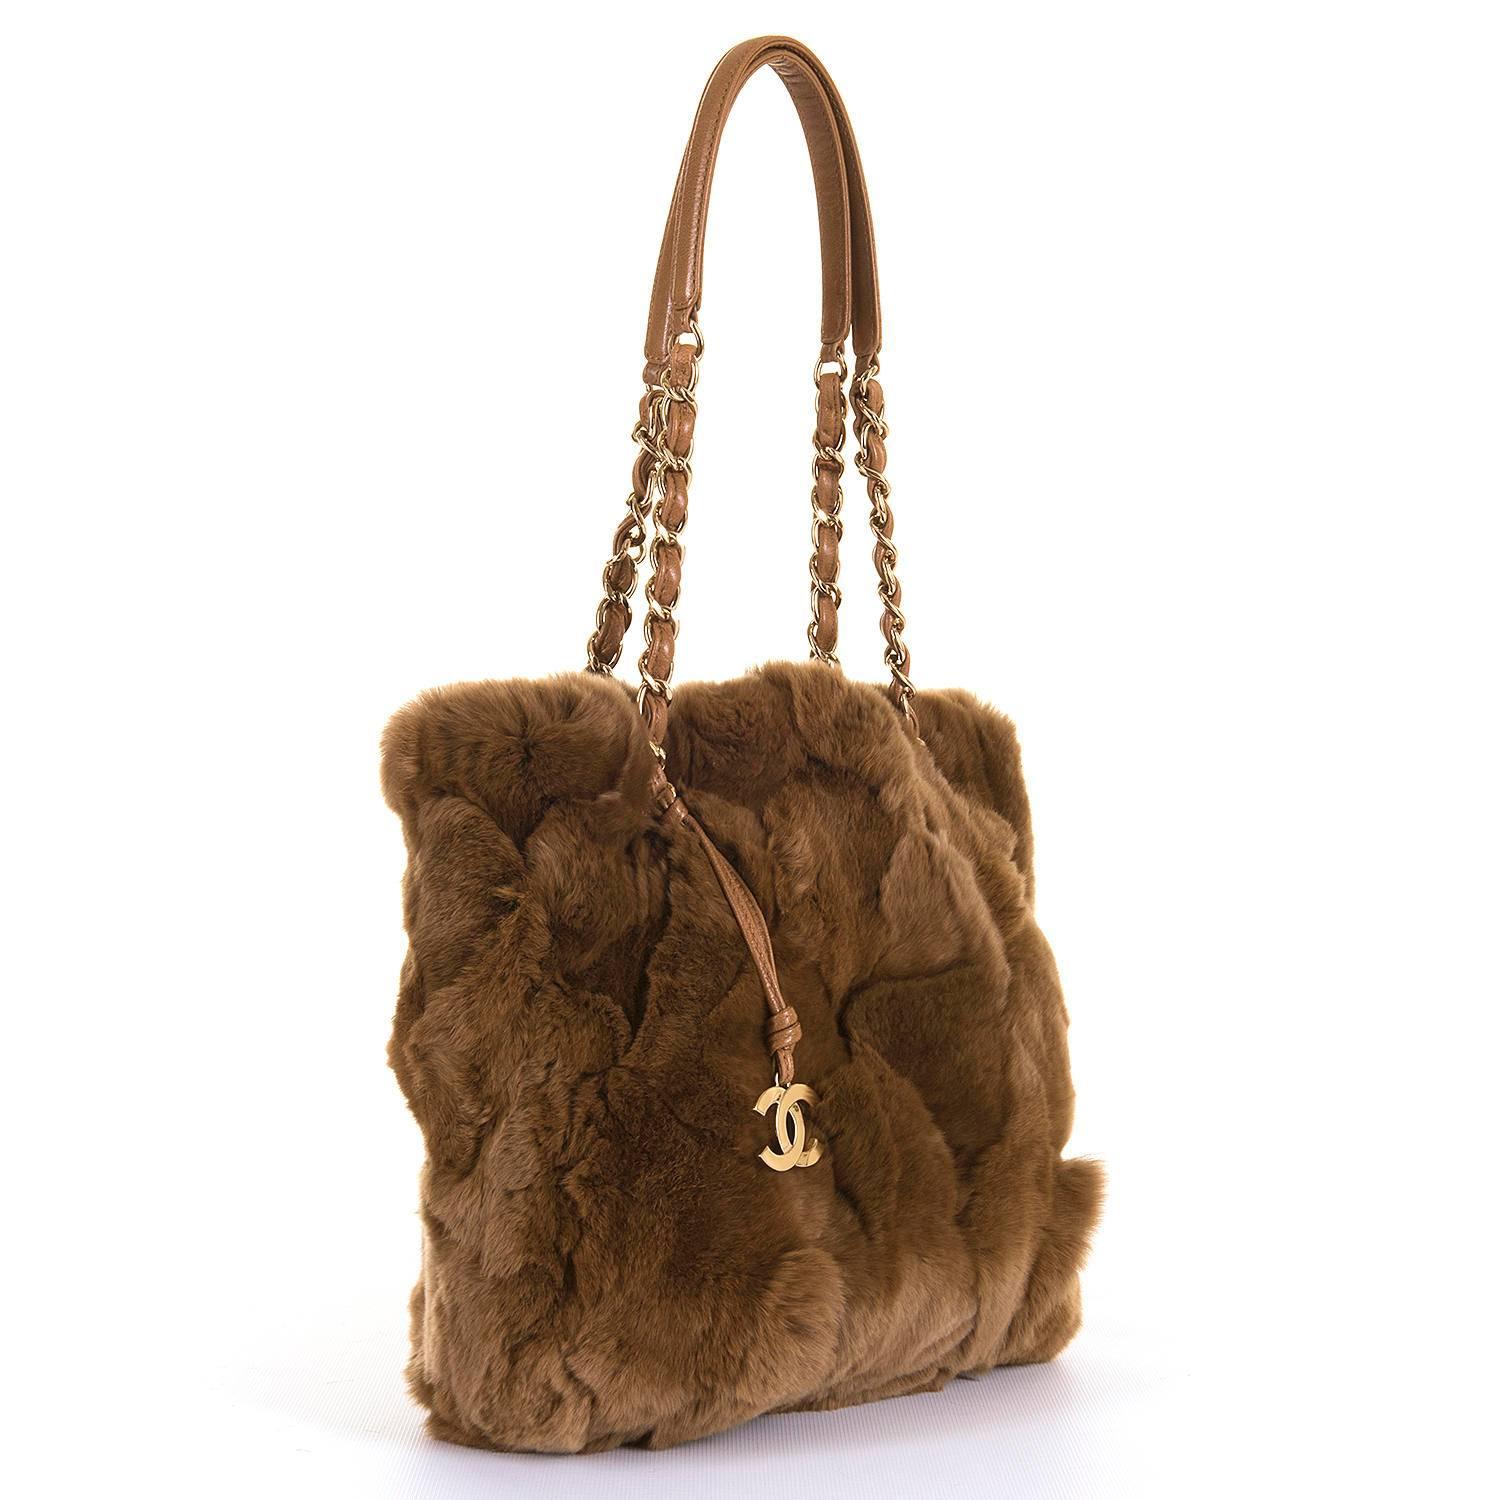 A rare and much sought-after Chanel Jumbo Fur Shoulder bag, finished in 'Chataigne' colour fur with camel leather trim and gold tone hardware. In pristine, store-fresh condition, the bag is decorated with a gold double 'C' fob, with double handles,